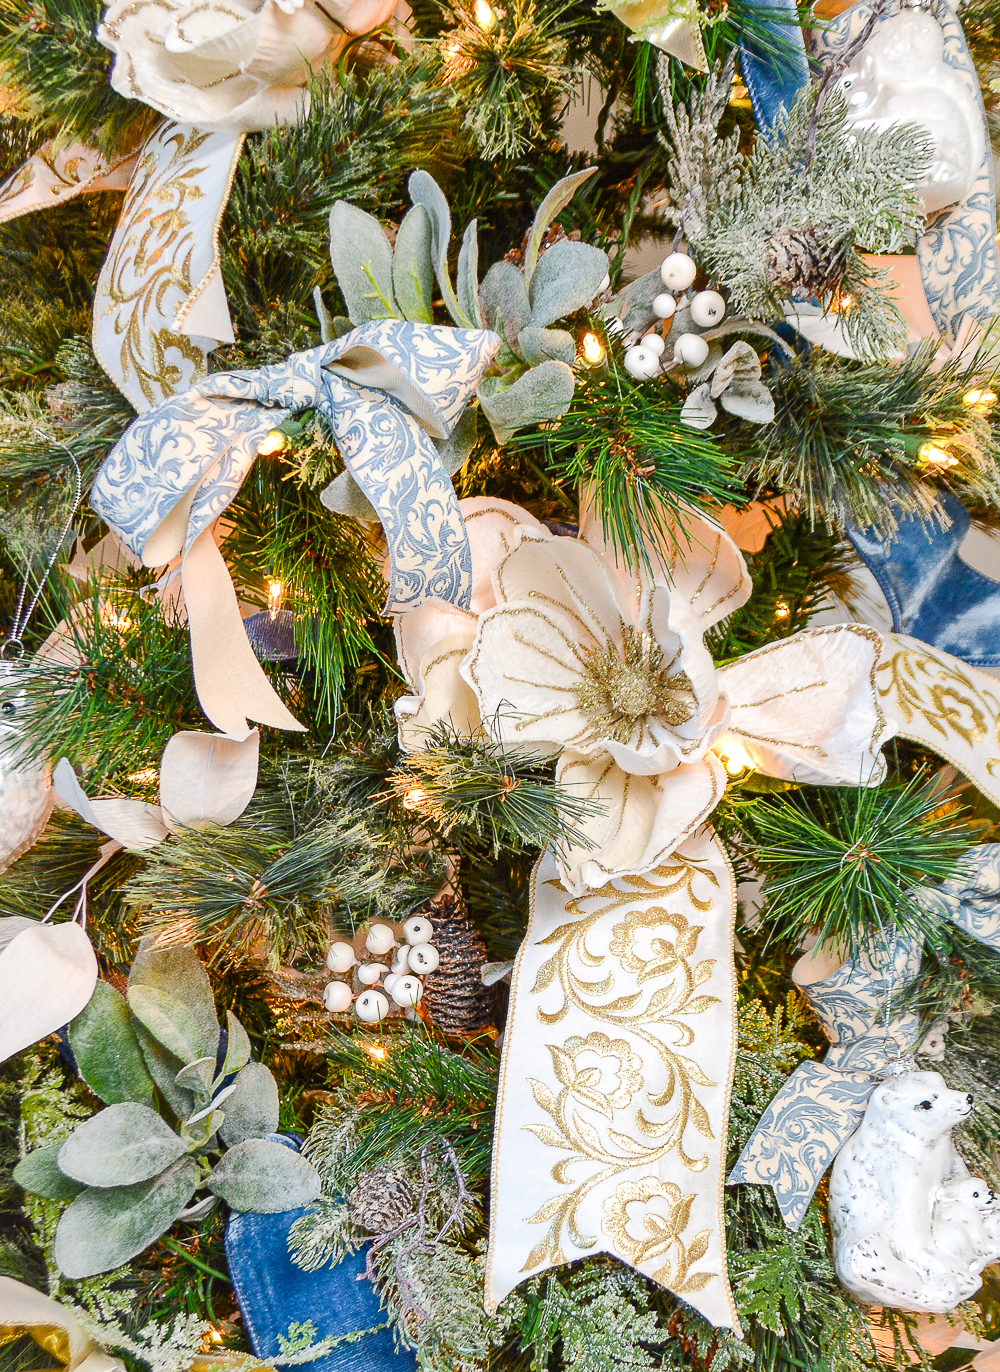 A gorgeous lusly decorated Christmas tree in blue and white from the Frosted Winter collection from Pender and Peony!